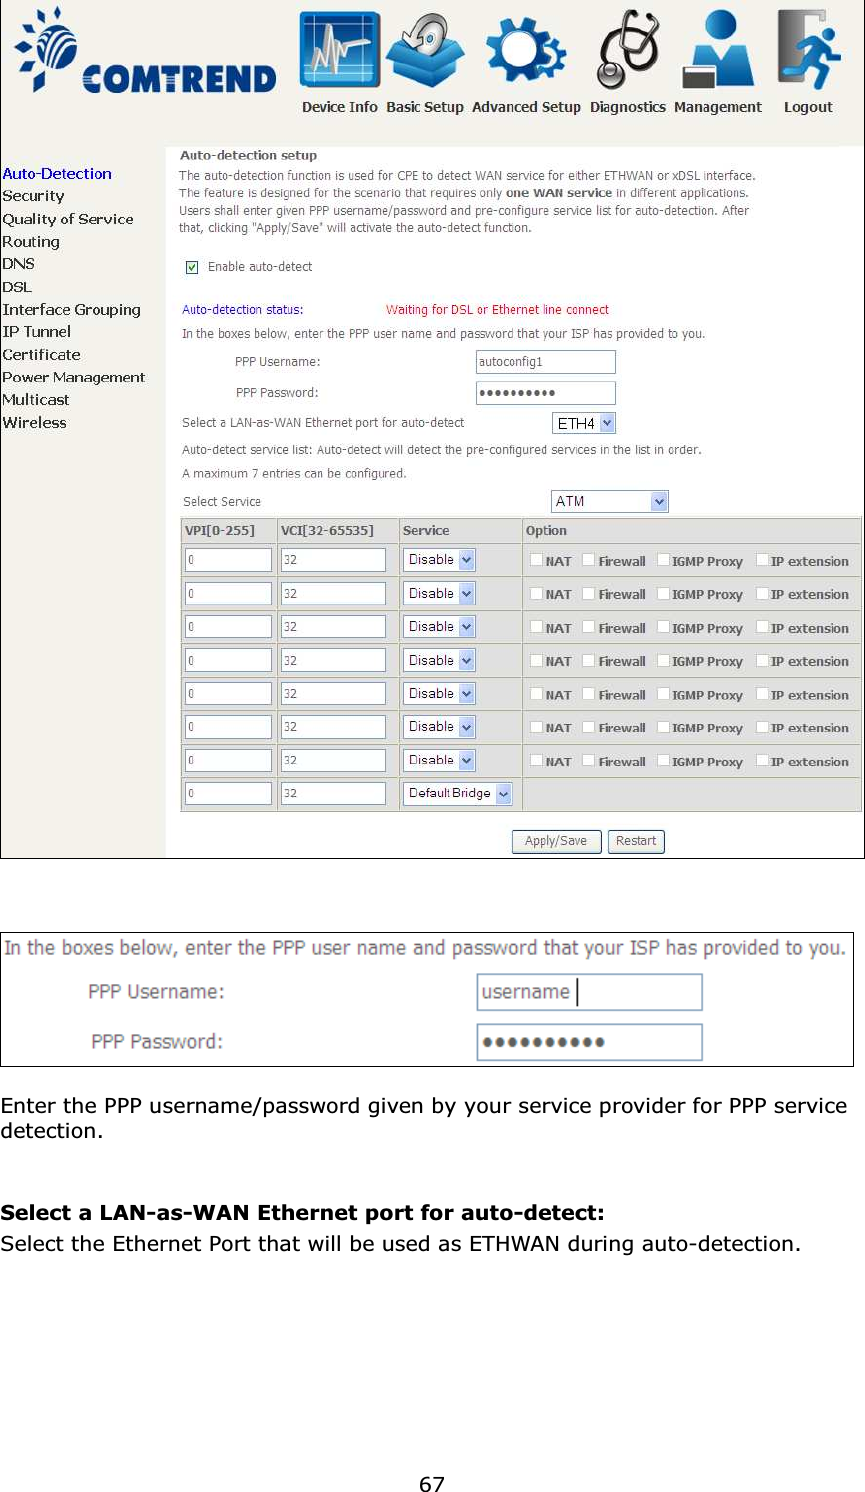  67       Enter the PPP username/password given by your service provider for PPP service detection.   Select a LAN-as-WAN Ethernet port for auto-detect: Select the Ethernet Port that will be used as ETHWAN during auto-detection. 